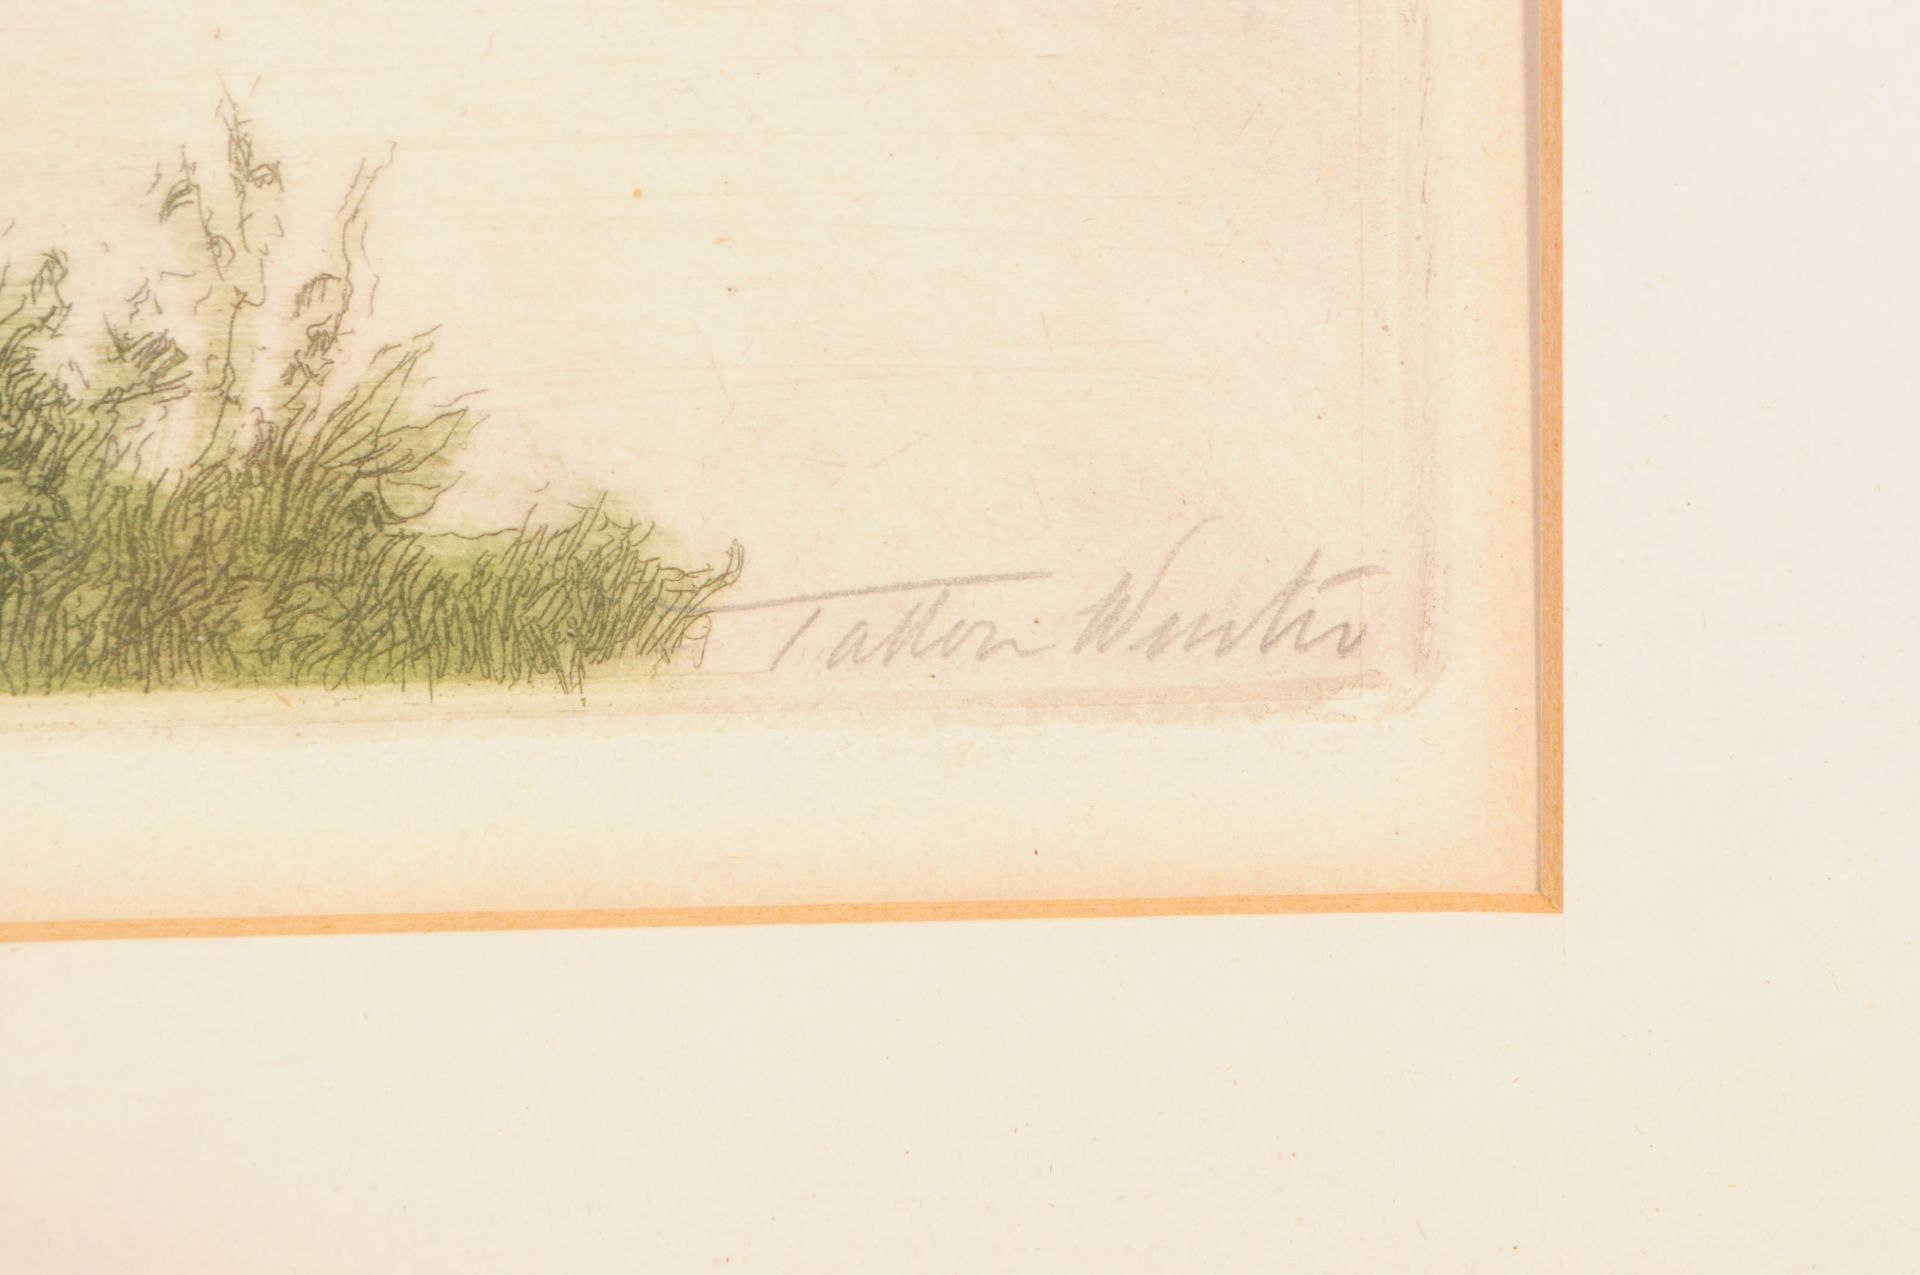 WILLIAM TATTON WINTER - SIGNED COLOURED ENGRAVING - Image 3 of 5